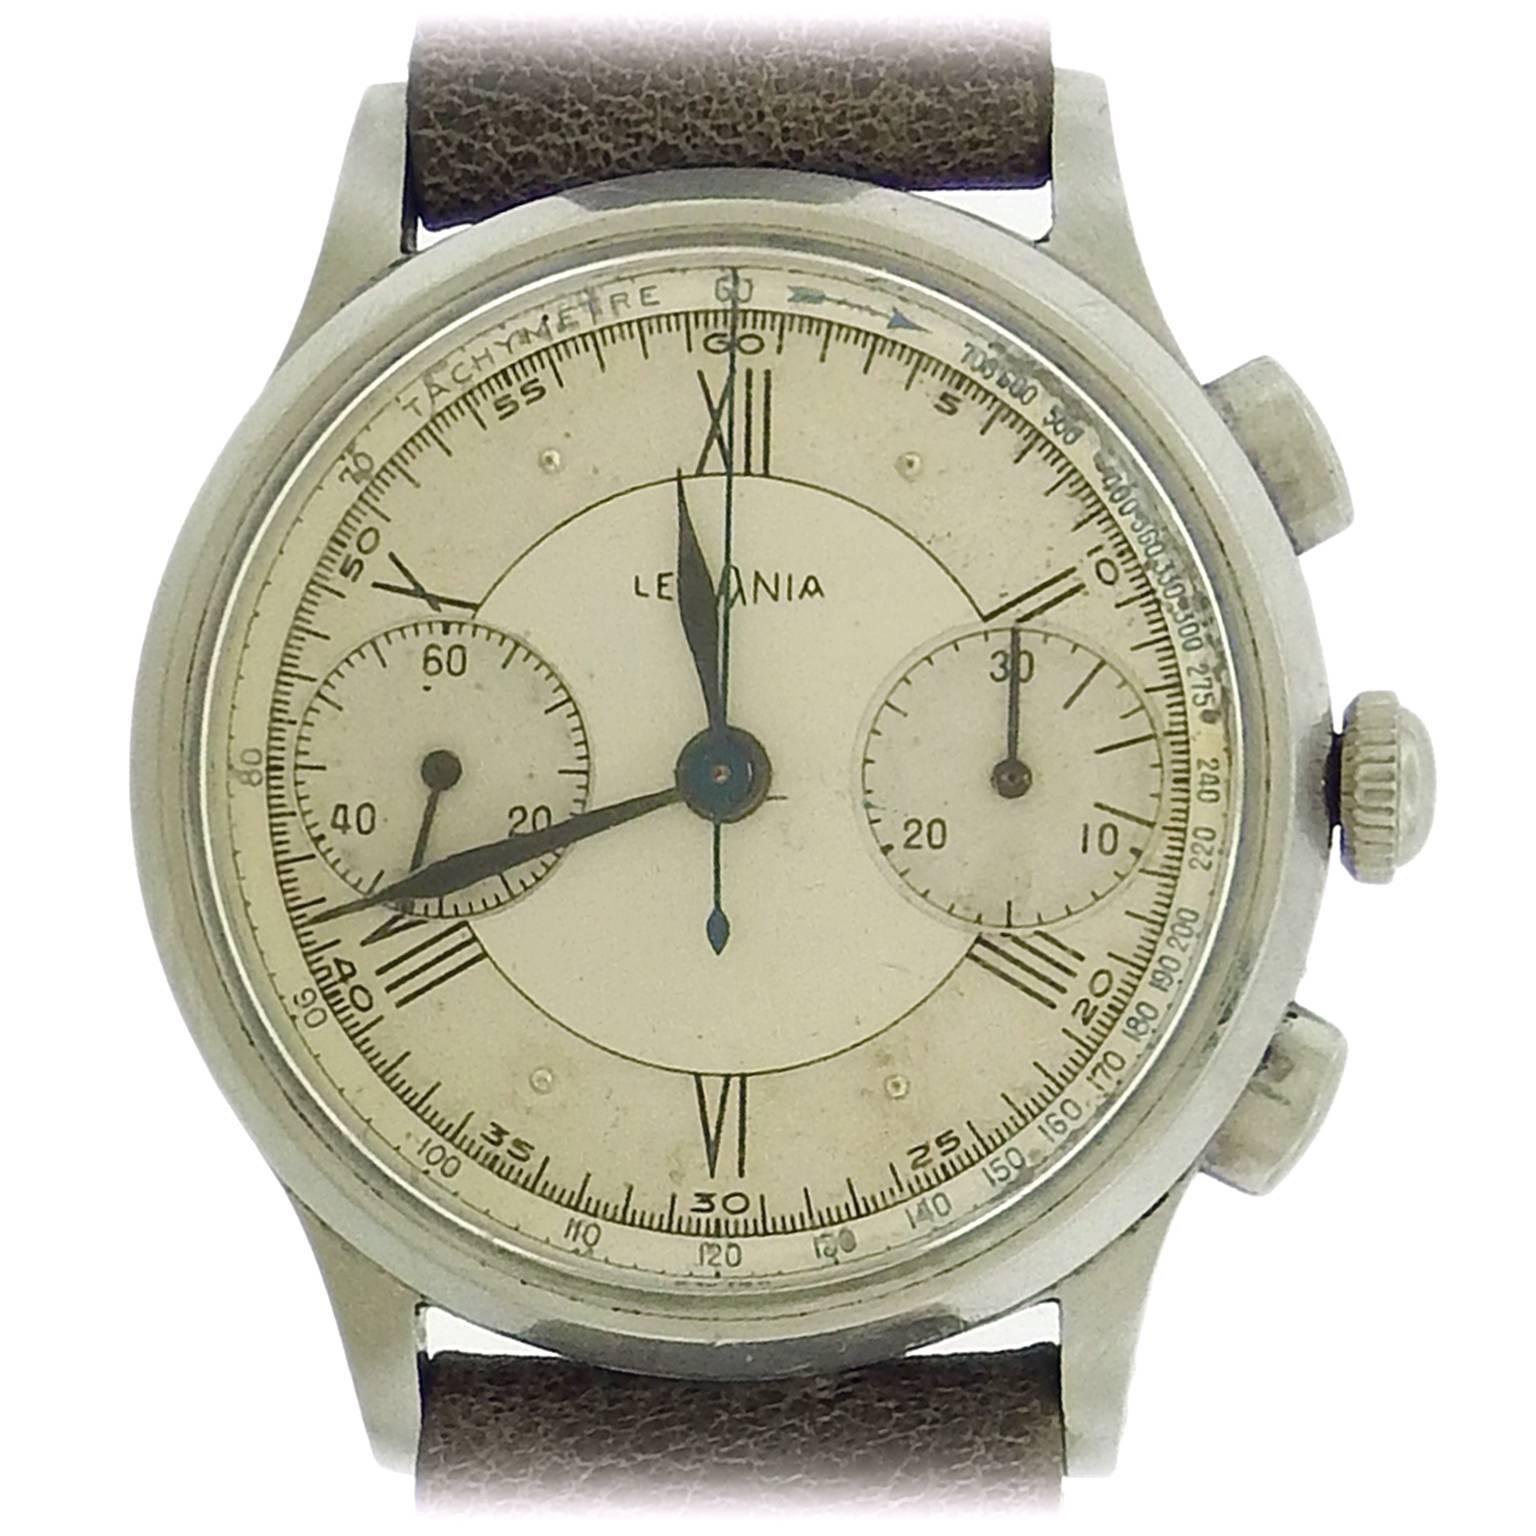 Lemania Stainless Steel Valjoux Chronograph Manual Wind Wristwatch 1940s